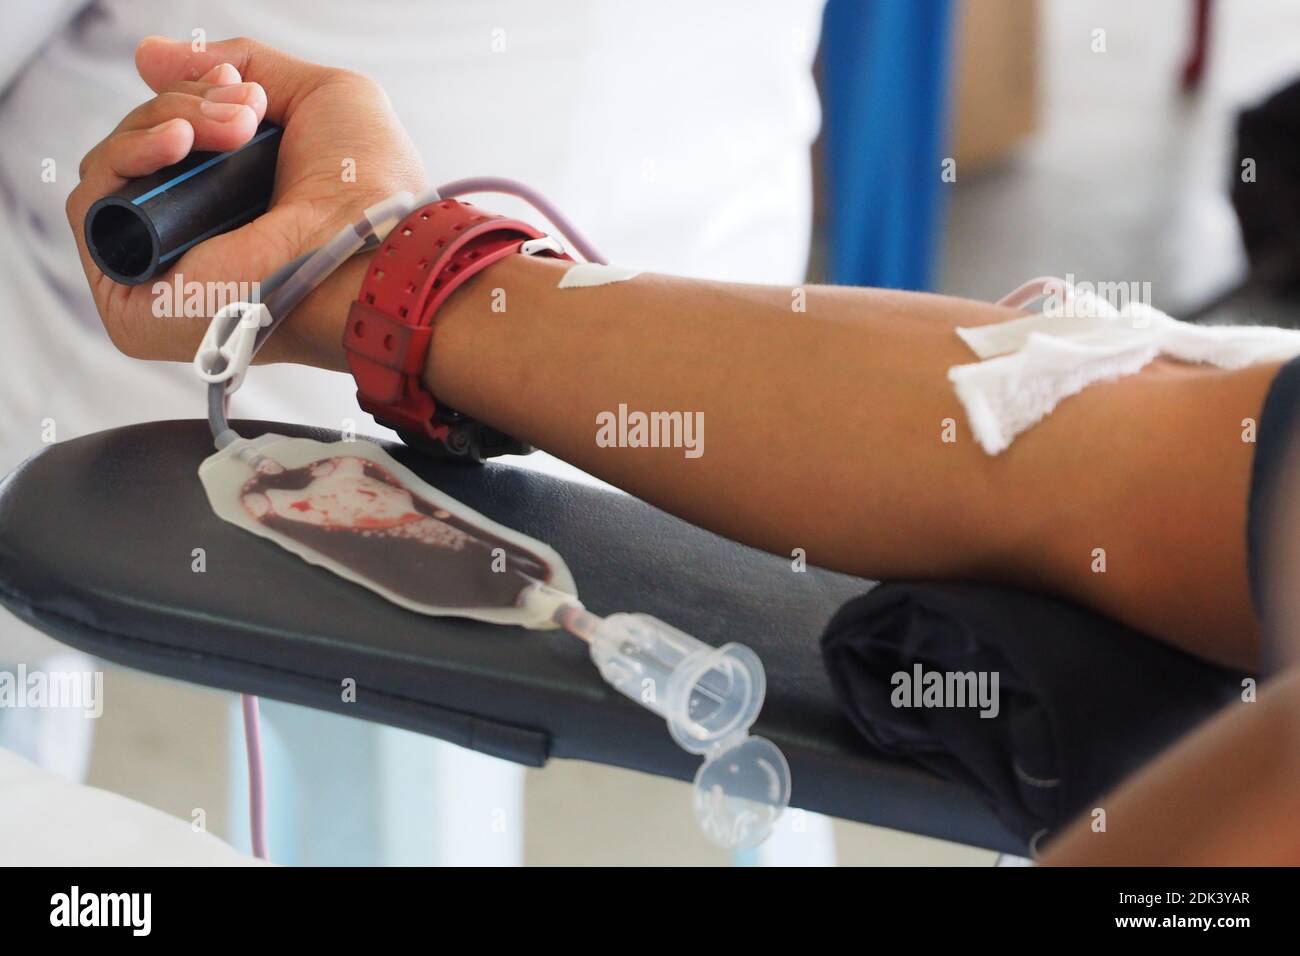 Cropped Image Of Patient At Blood Bank Stock Photo